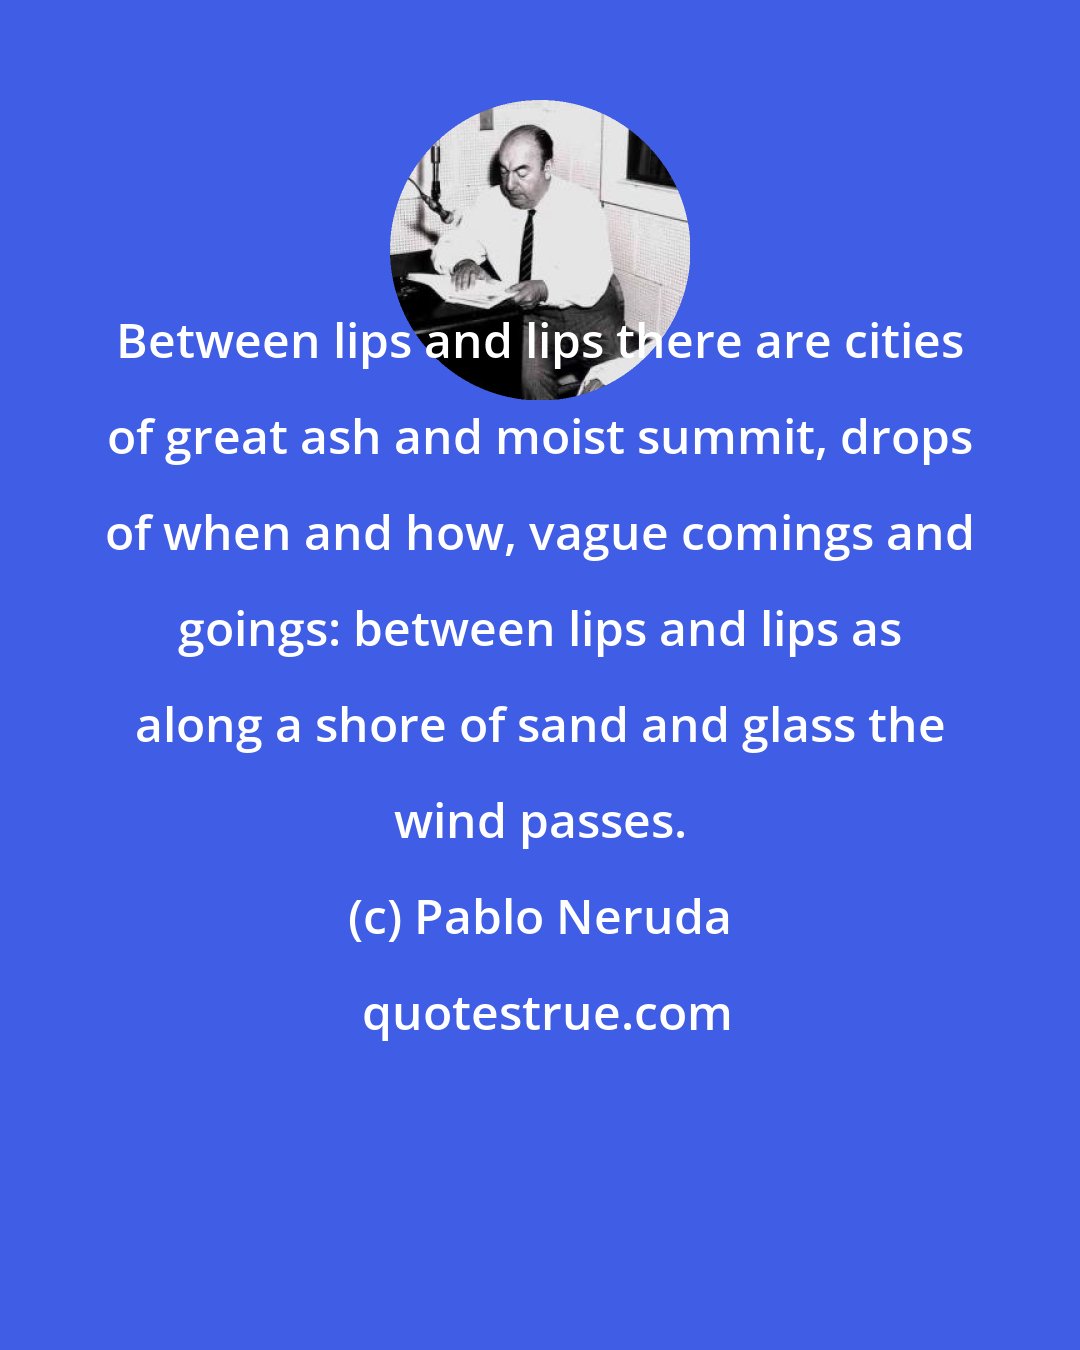 Pablo Neruda: Between lips and lips there are cities of great ash and moist summit, drops of when and how, vague comings and goings: between lips and lips as along a shore of sand and glass the wind passes.